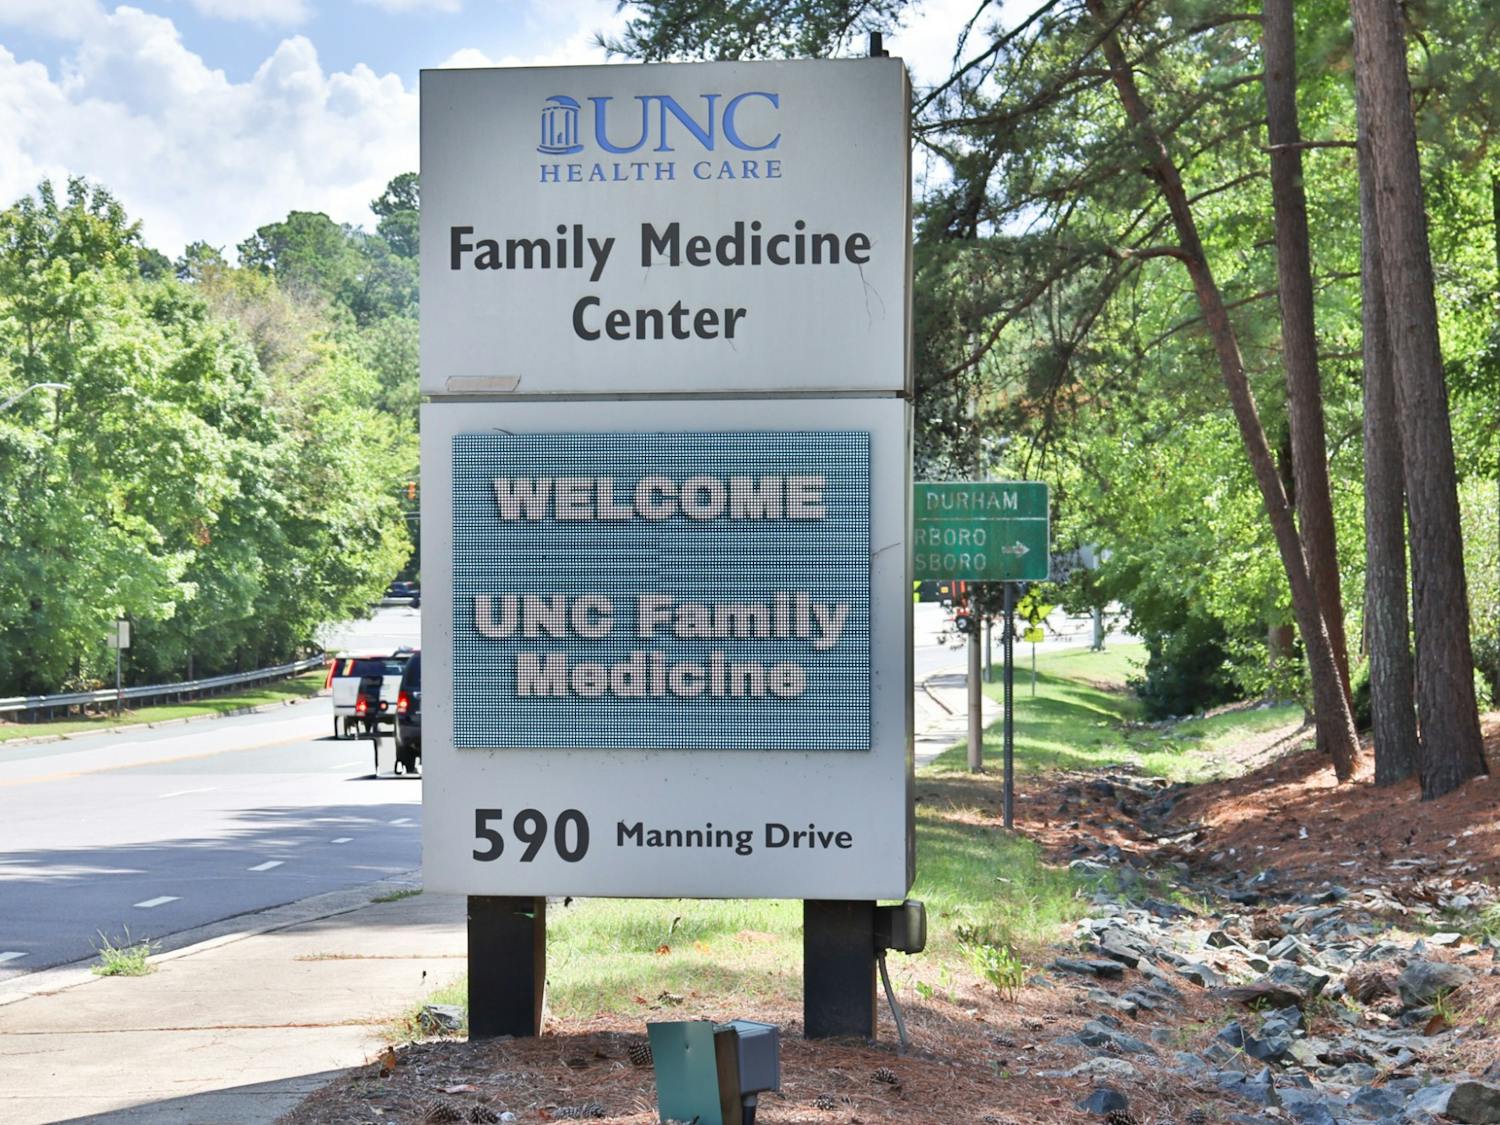 The UNC Family Medicine Center, pictured here on Monday, Sept. 12, 2022, offers COVID-19 vaccines and testing.